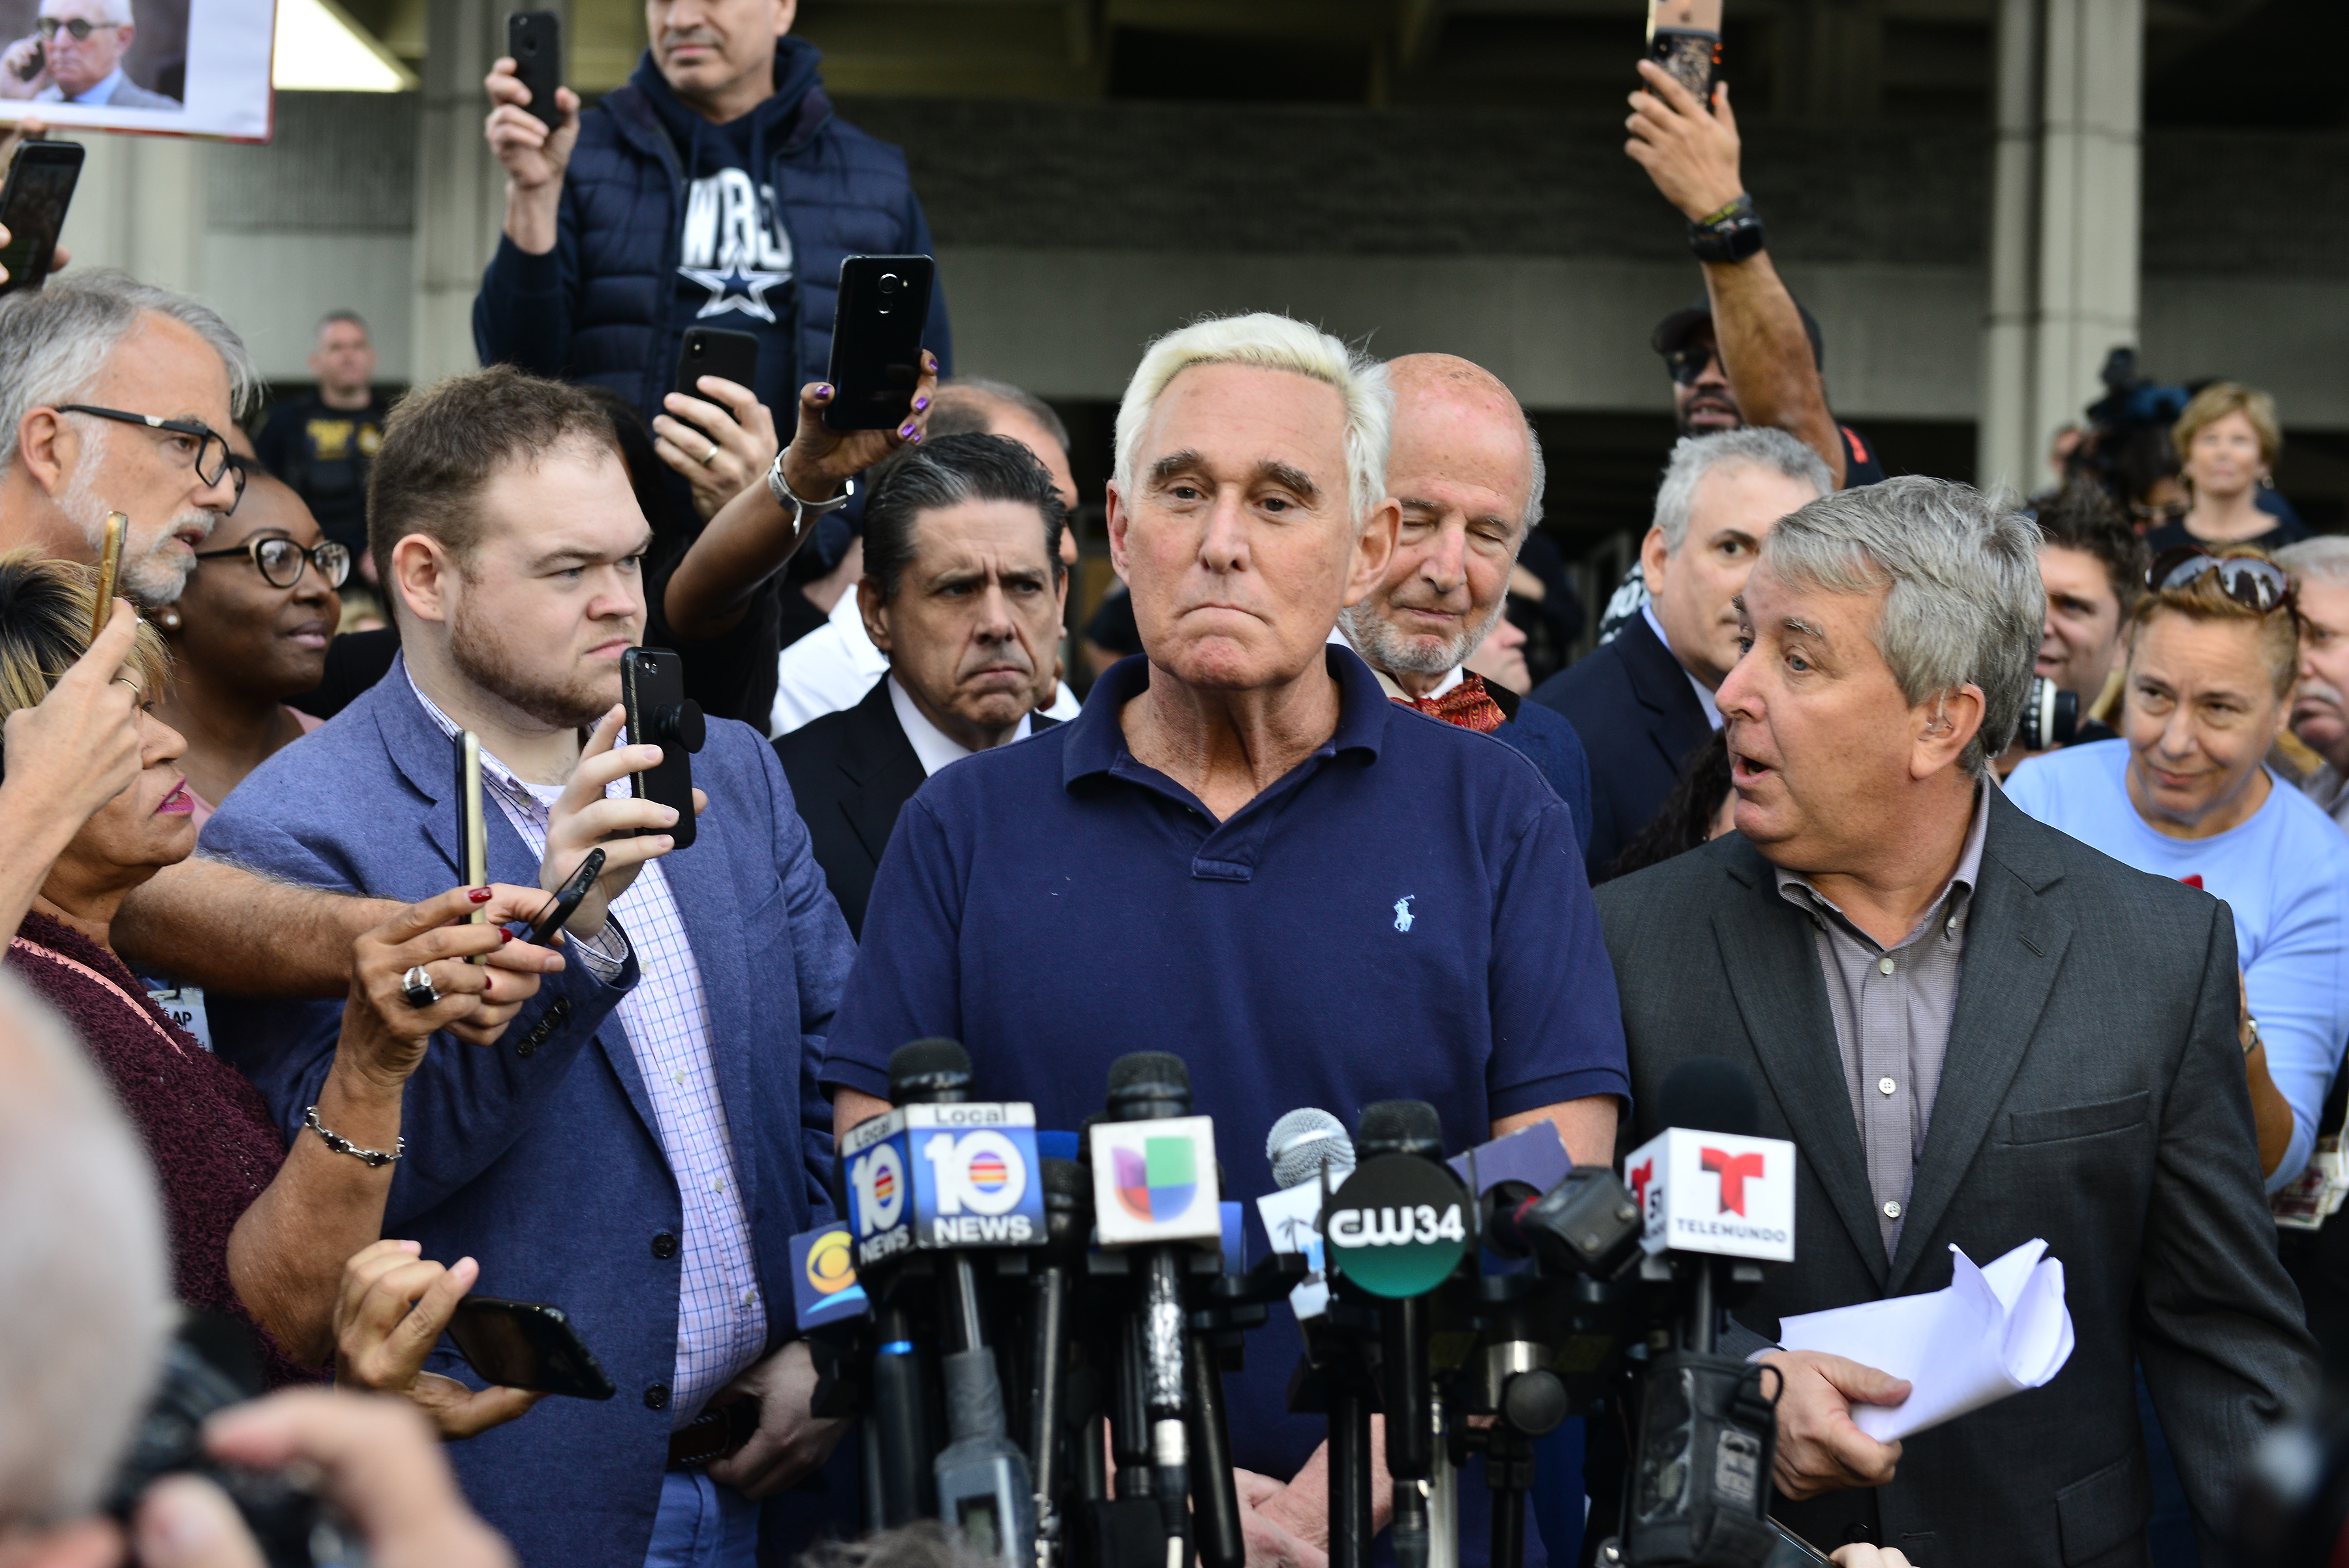 Roger Stone, former Trump campaign advisor, speaks to the media outside the Fort Lauderdale Federal Courthouse after being arrested by the FBI